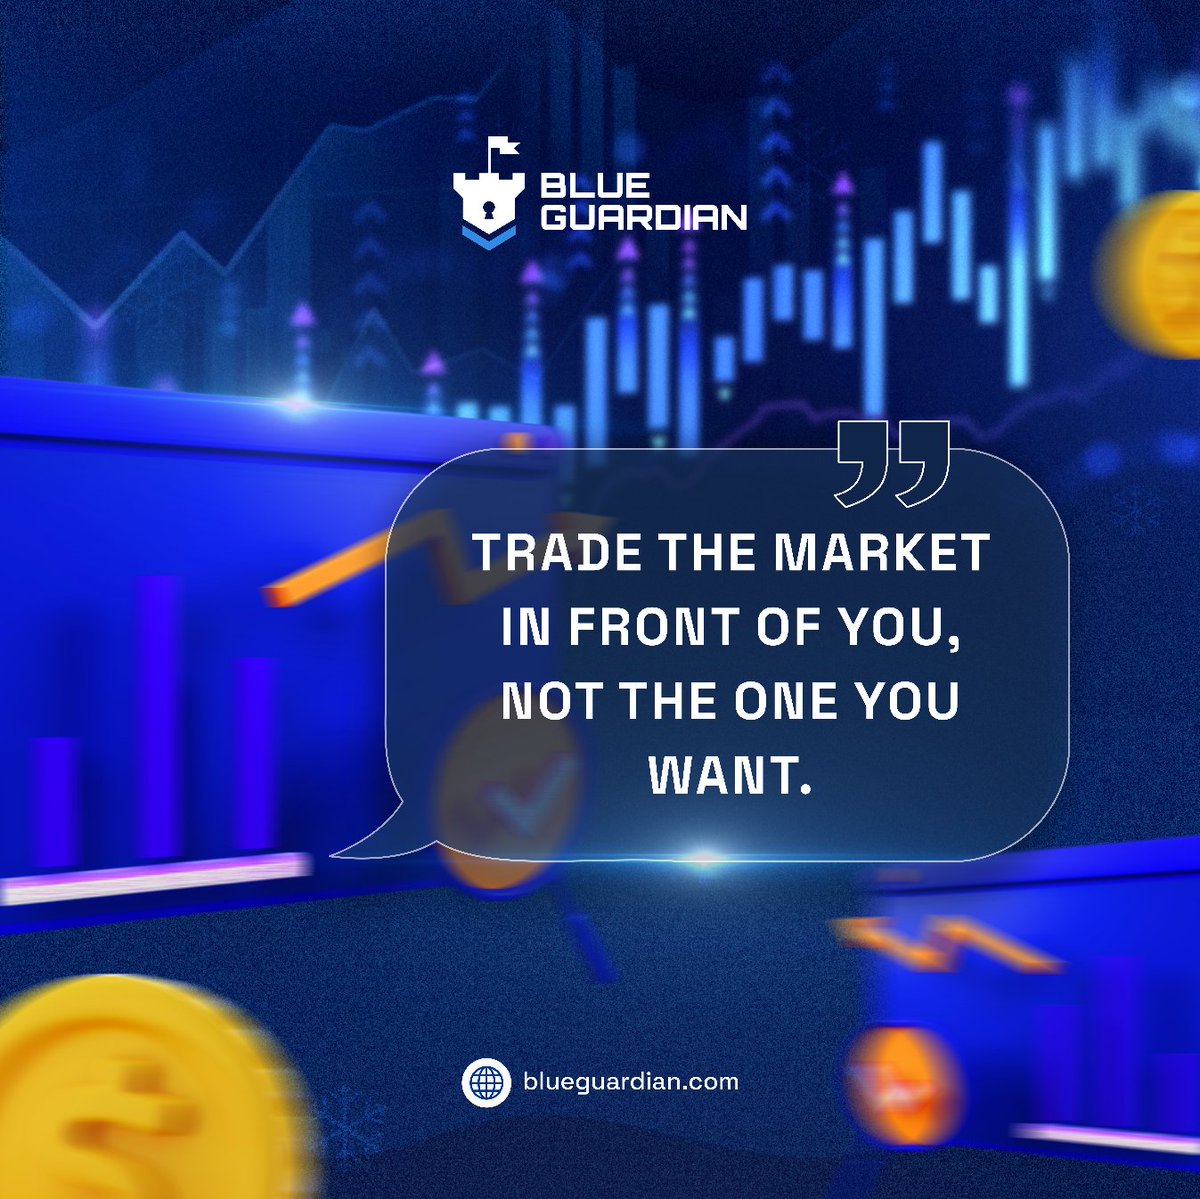 Success hinges on your ability to trade based on what you see, not what you think you see. Stick to your models and keep emotions out of it. That's the key to staying in the Blue 🛡️